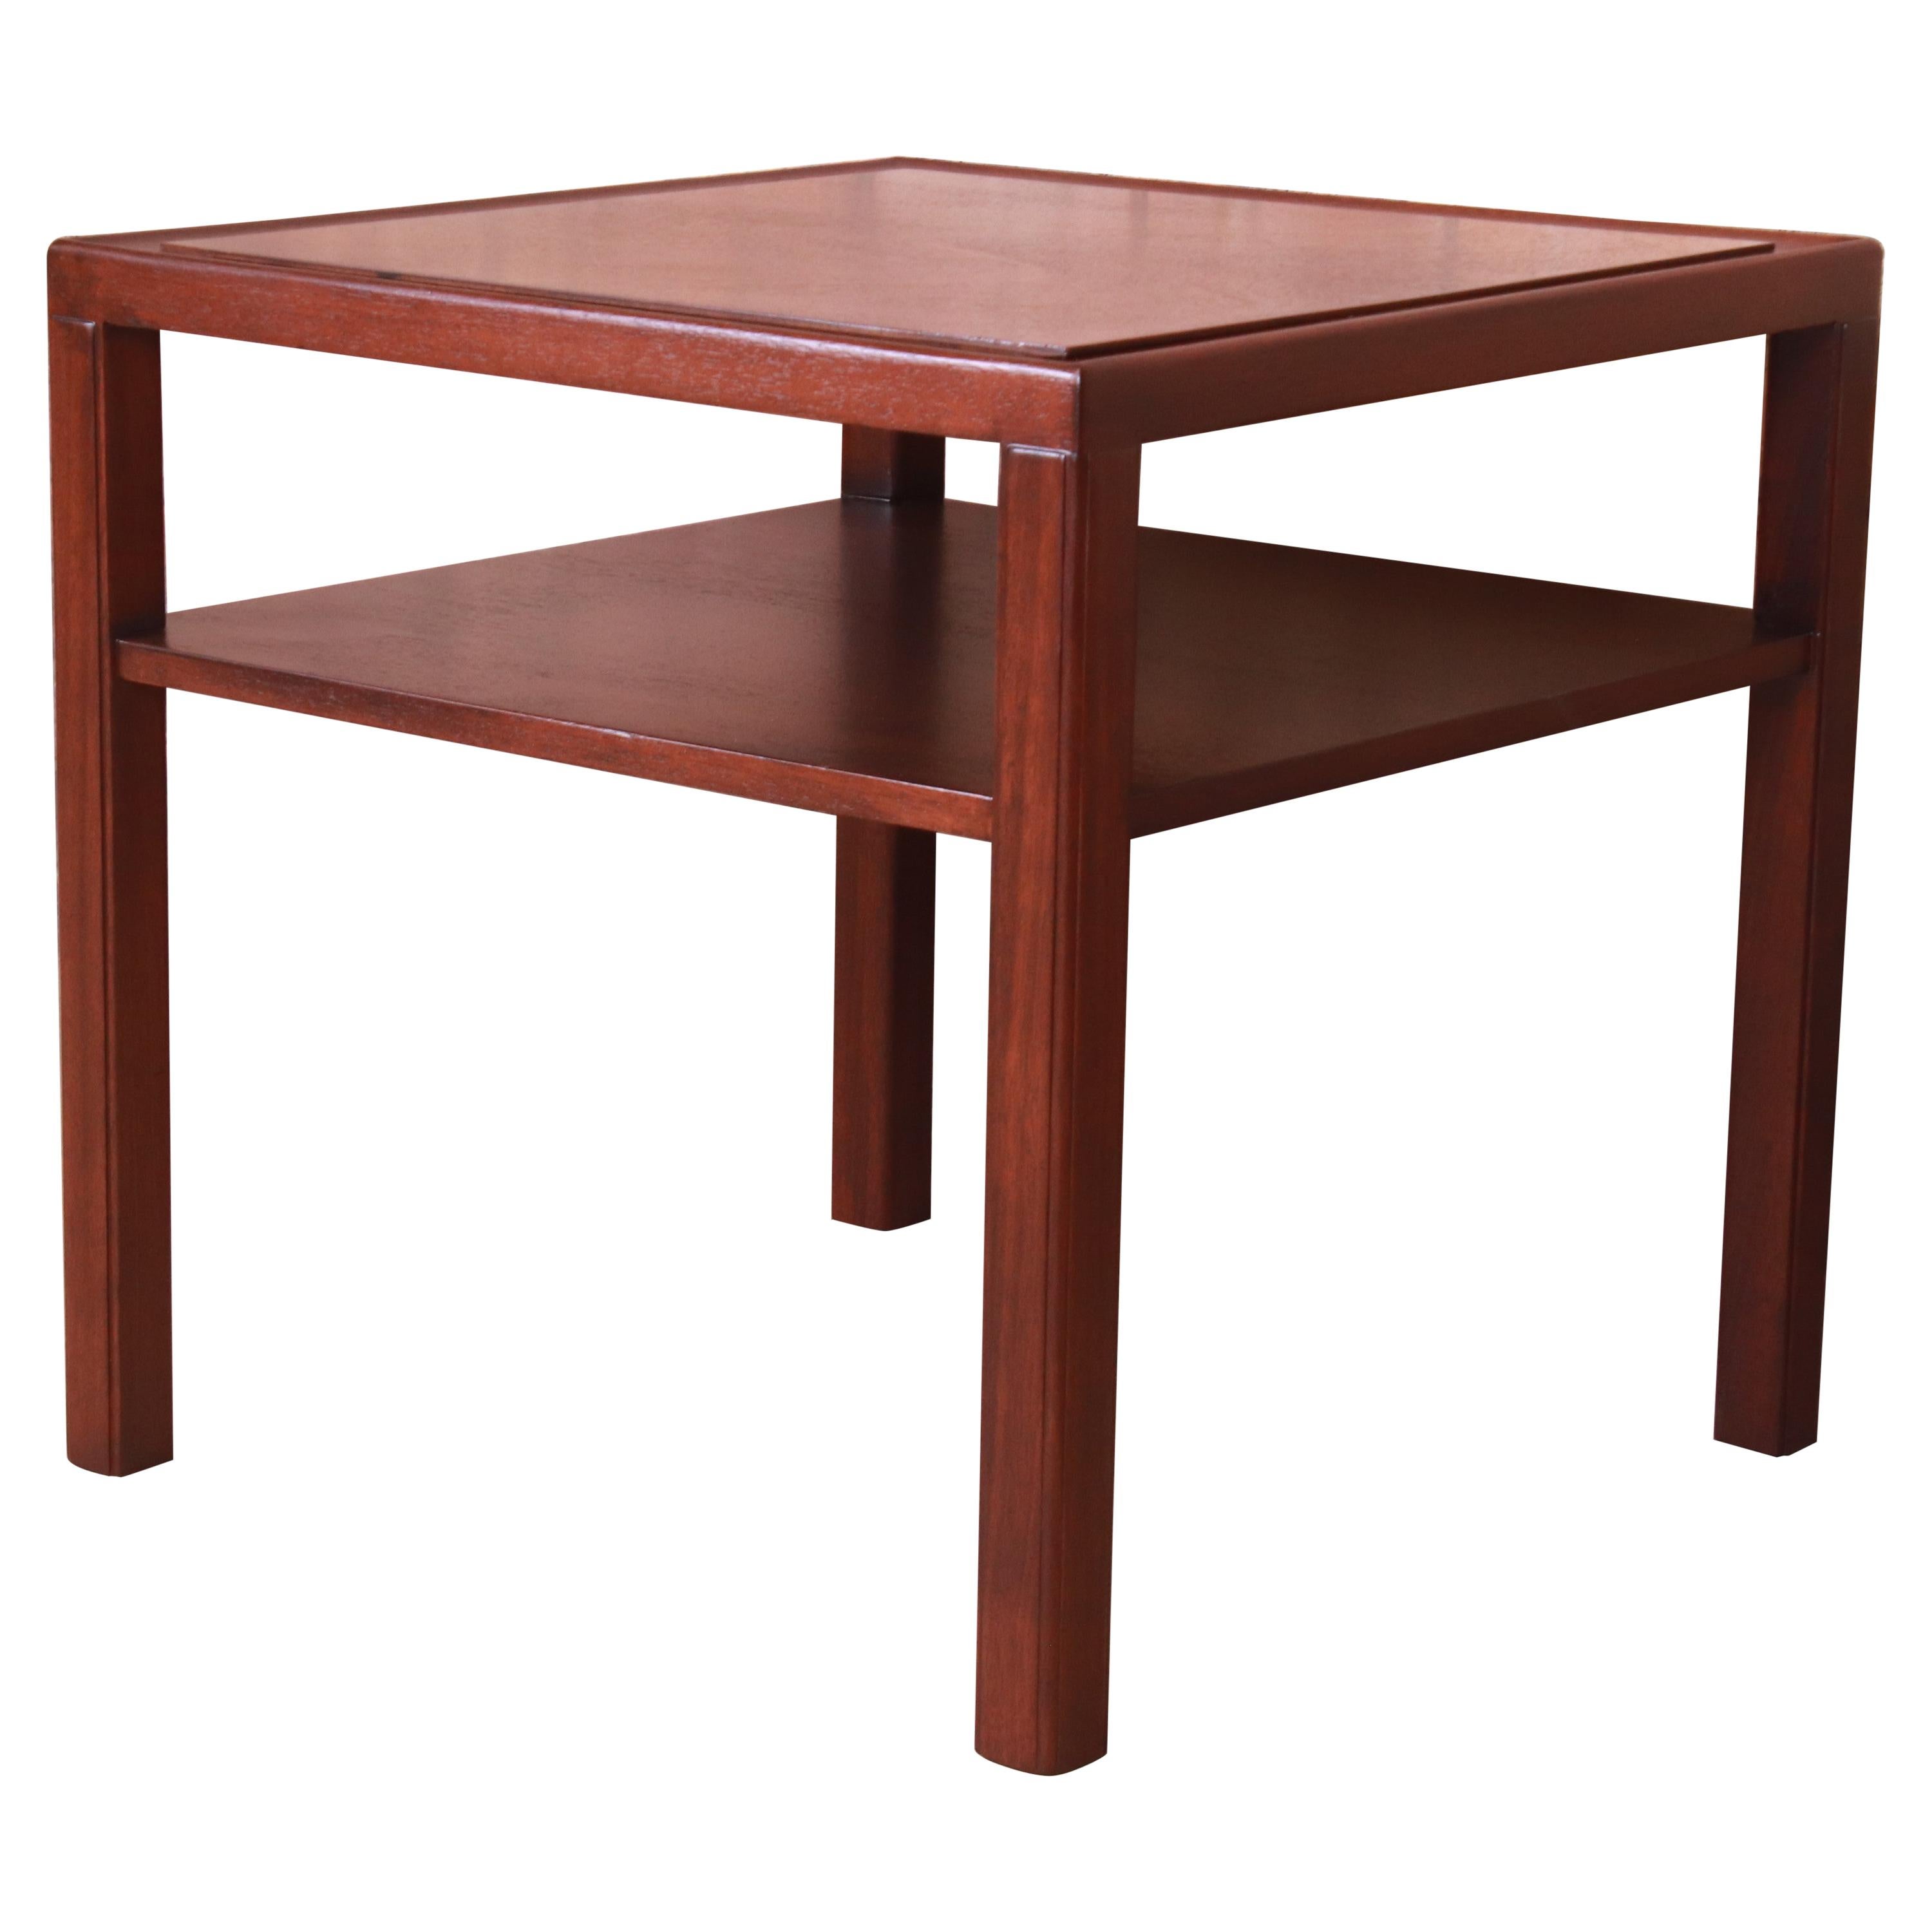 Edward Wormley for Dunbar Mahogany Two-Tier Occasional Side Table, Refinished